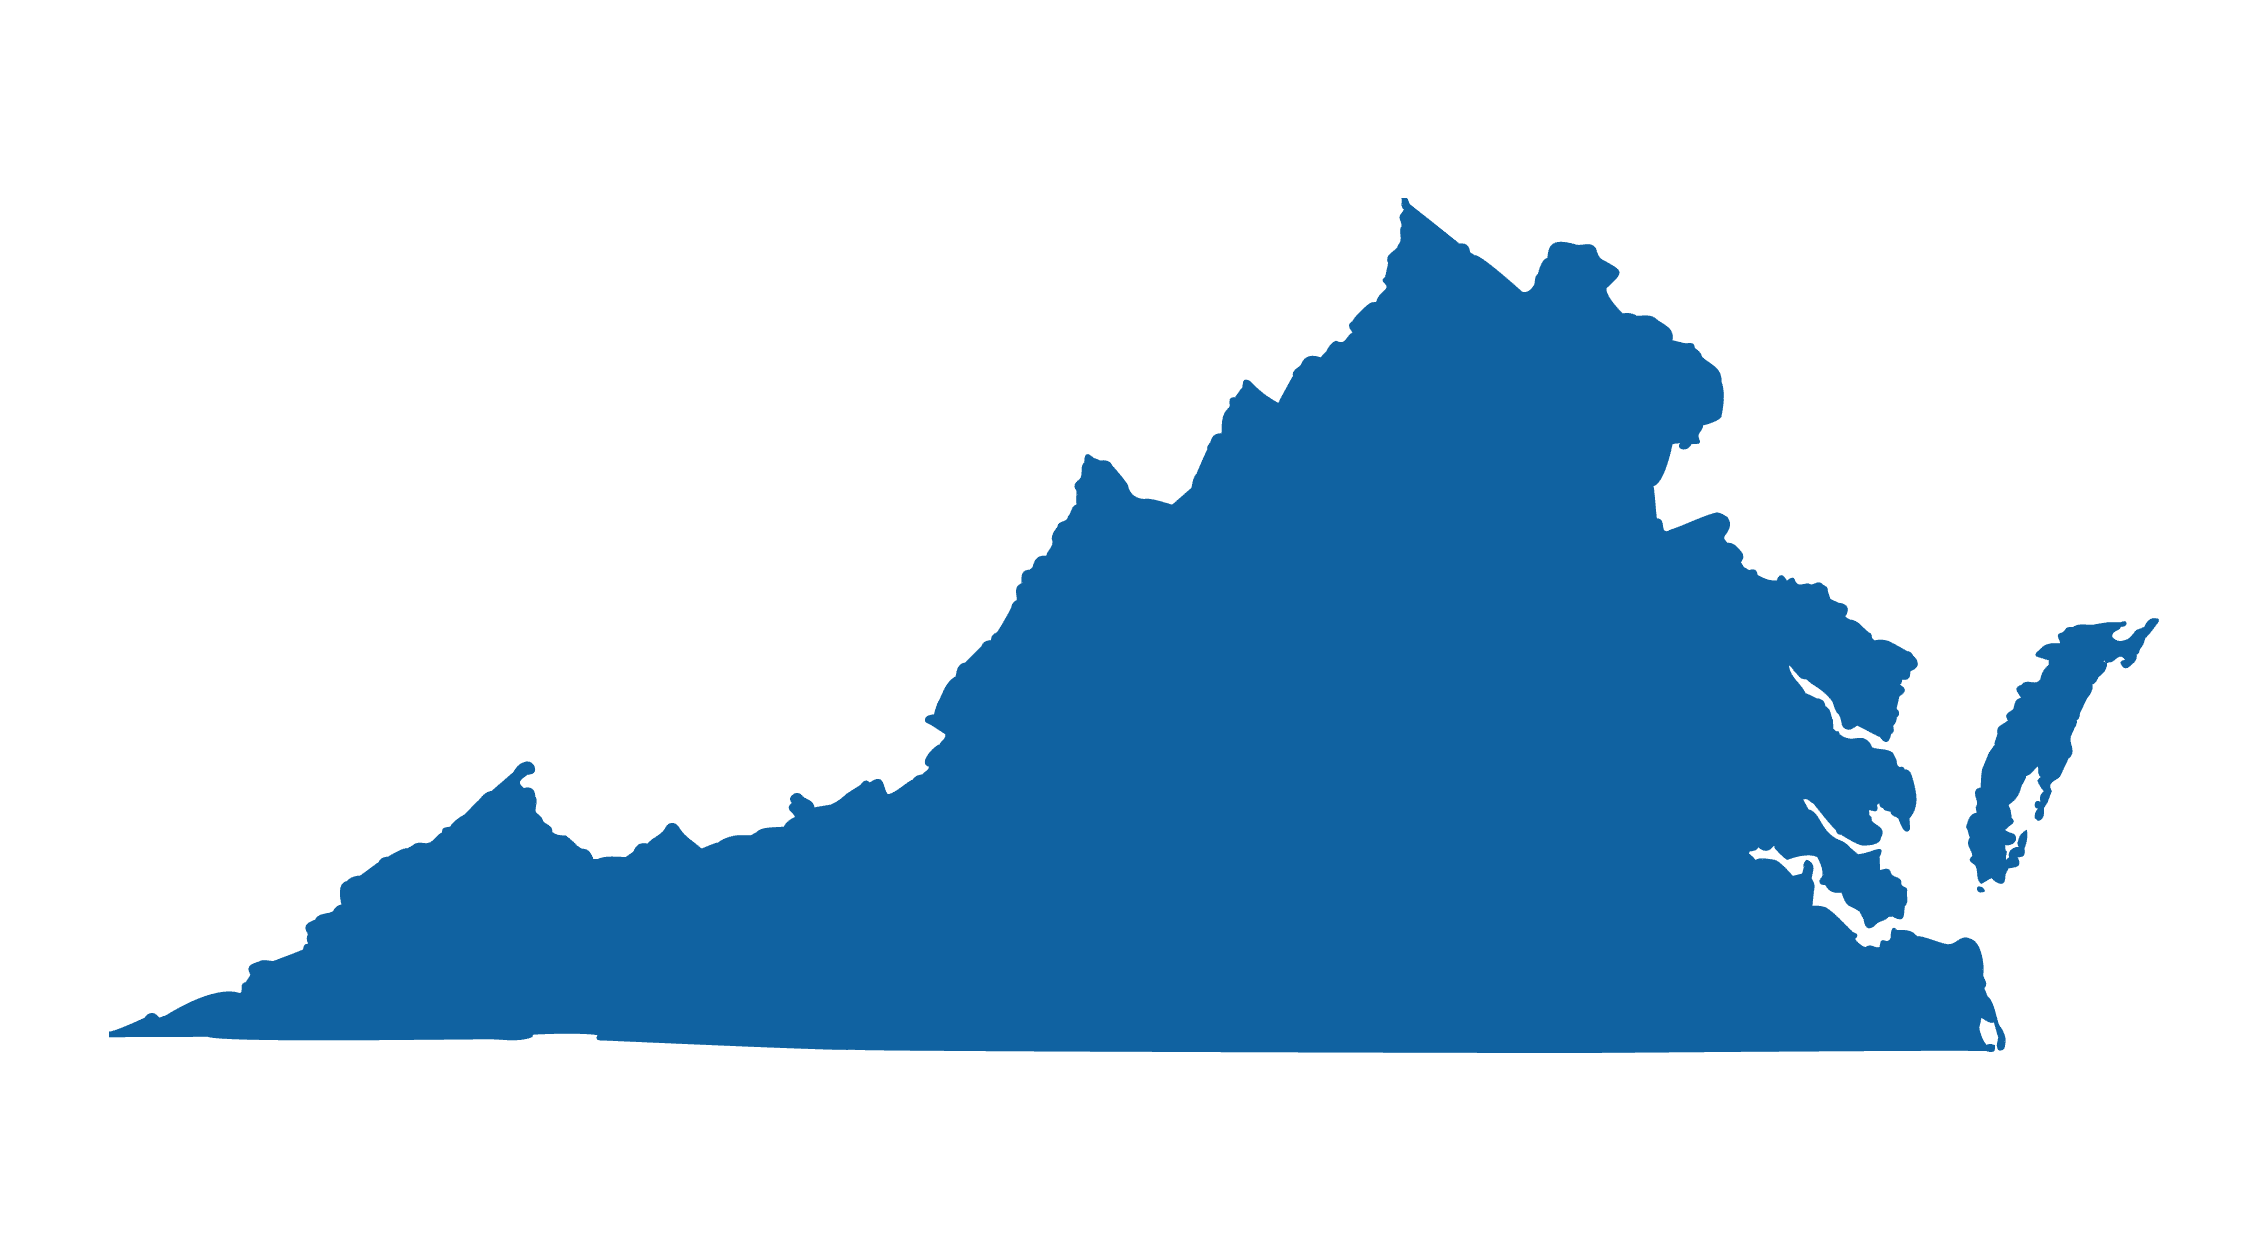 Outline of the state of Virginia colored a solid blue